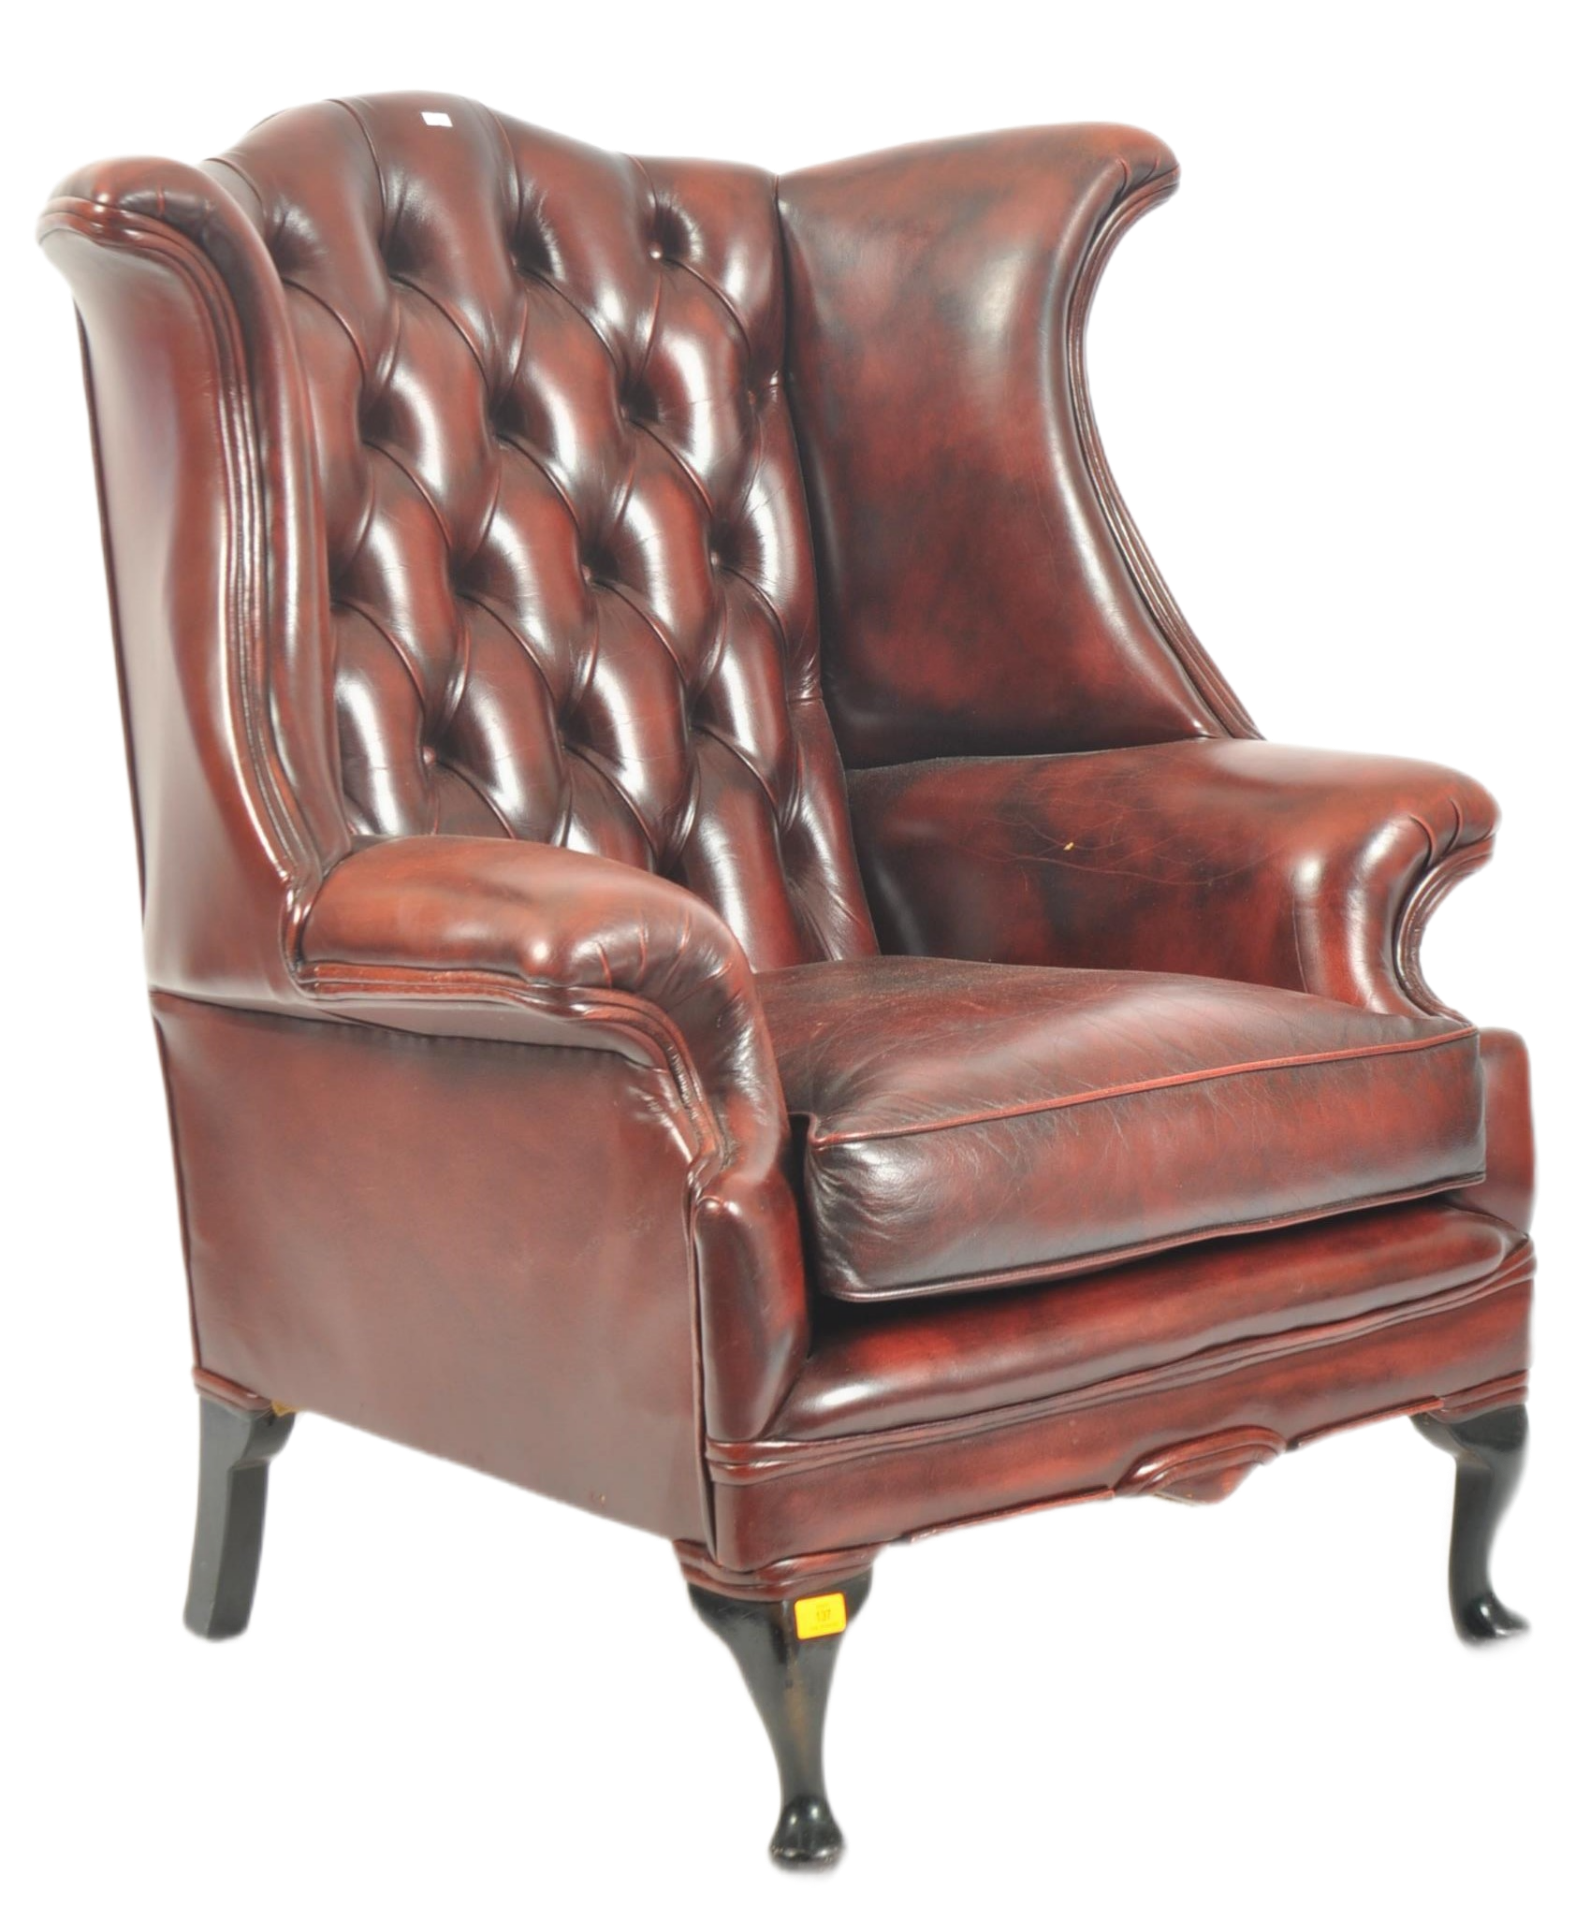 VINTAGE CHESTERFIELD QUEEN ANNE STYLE WINGBACK ARMCHAIR